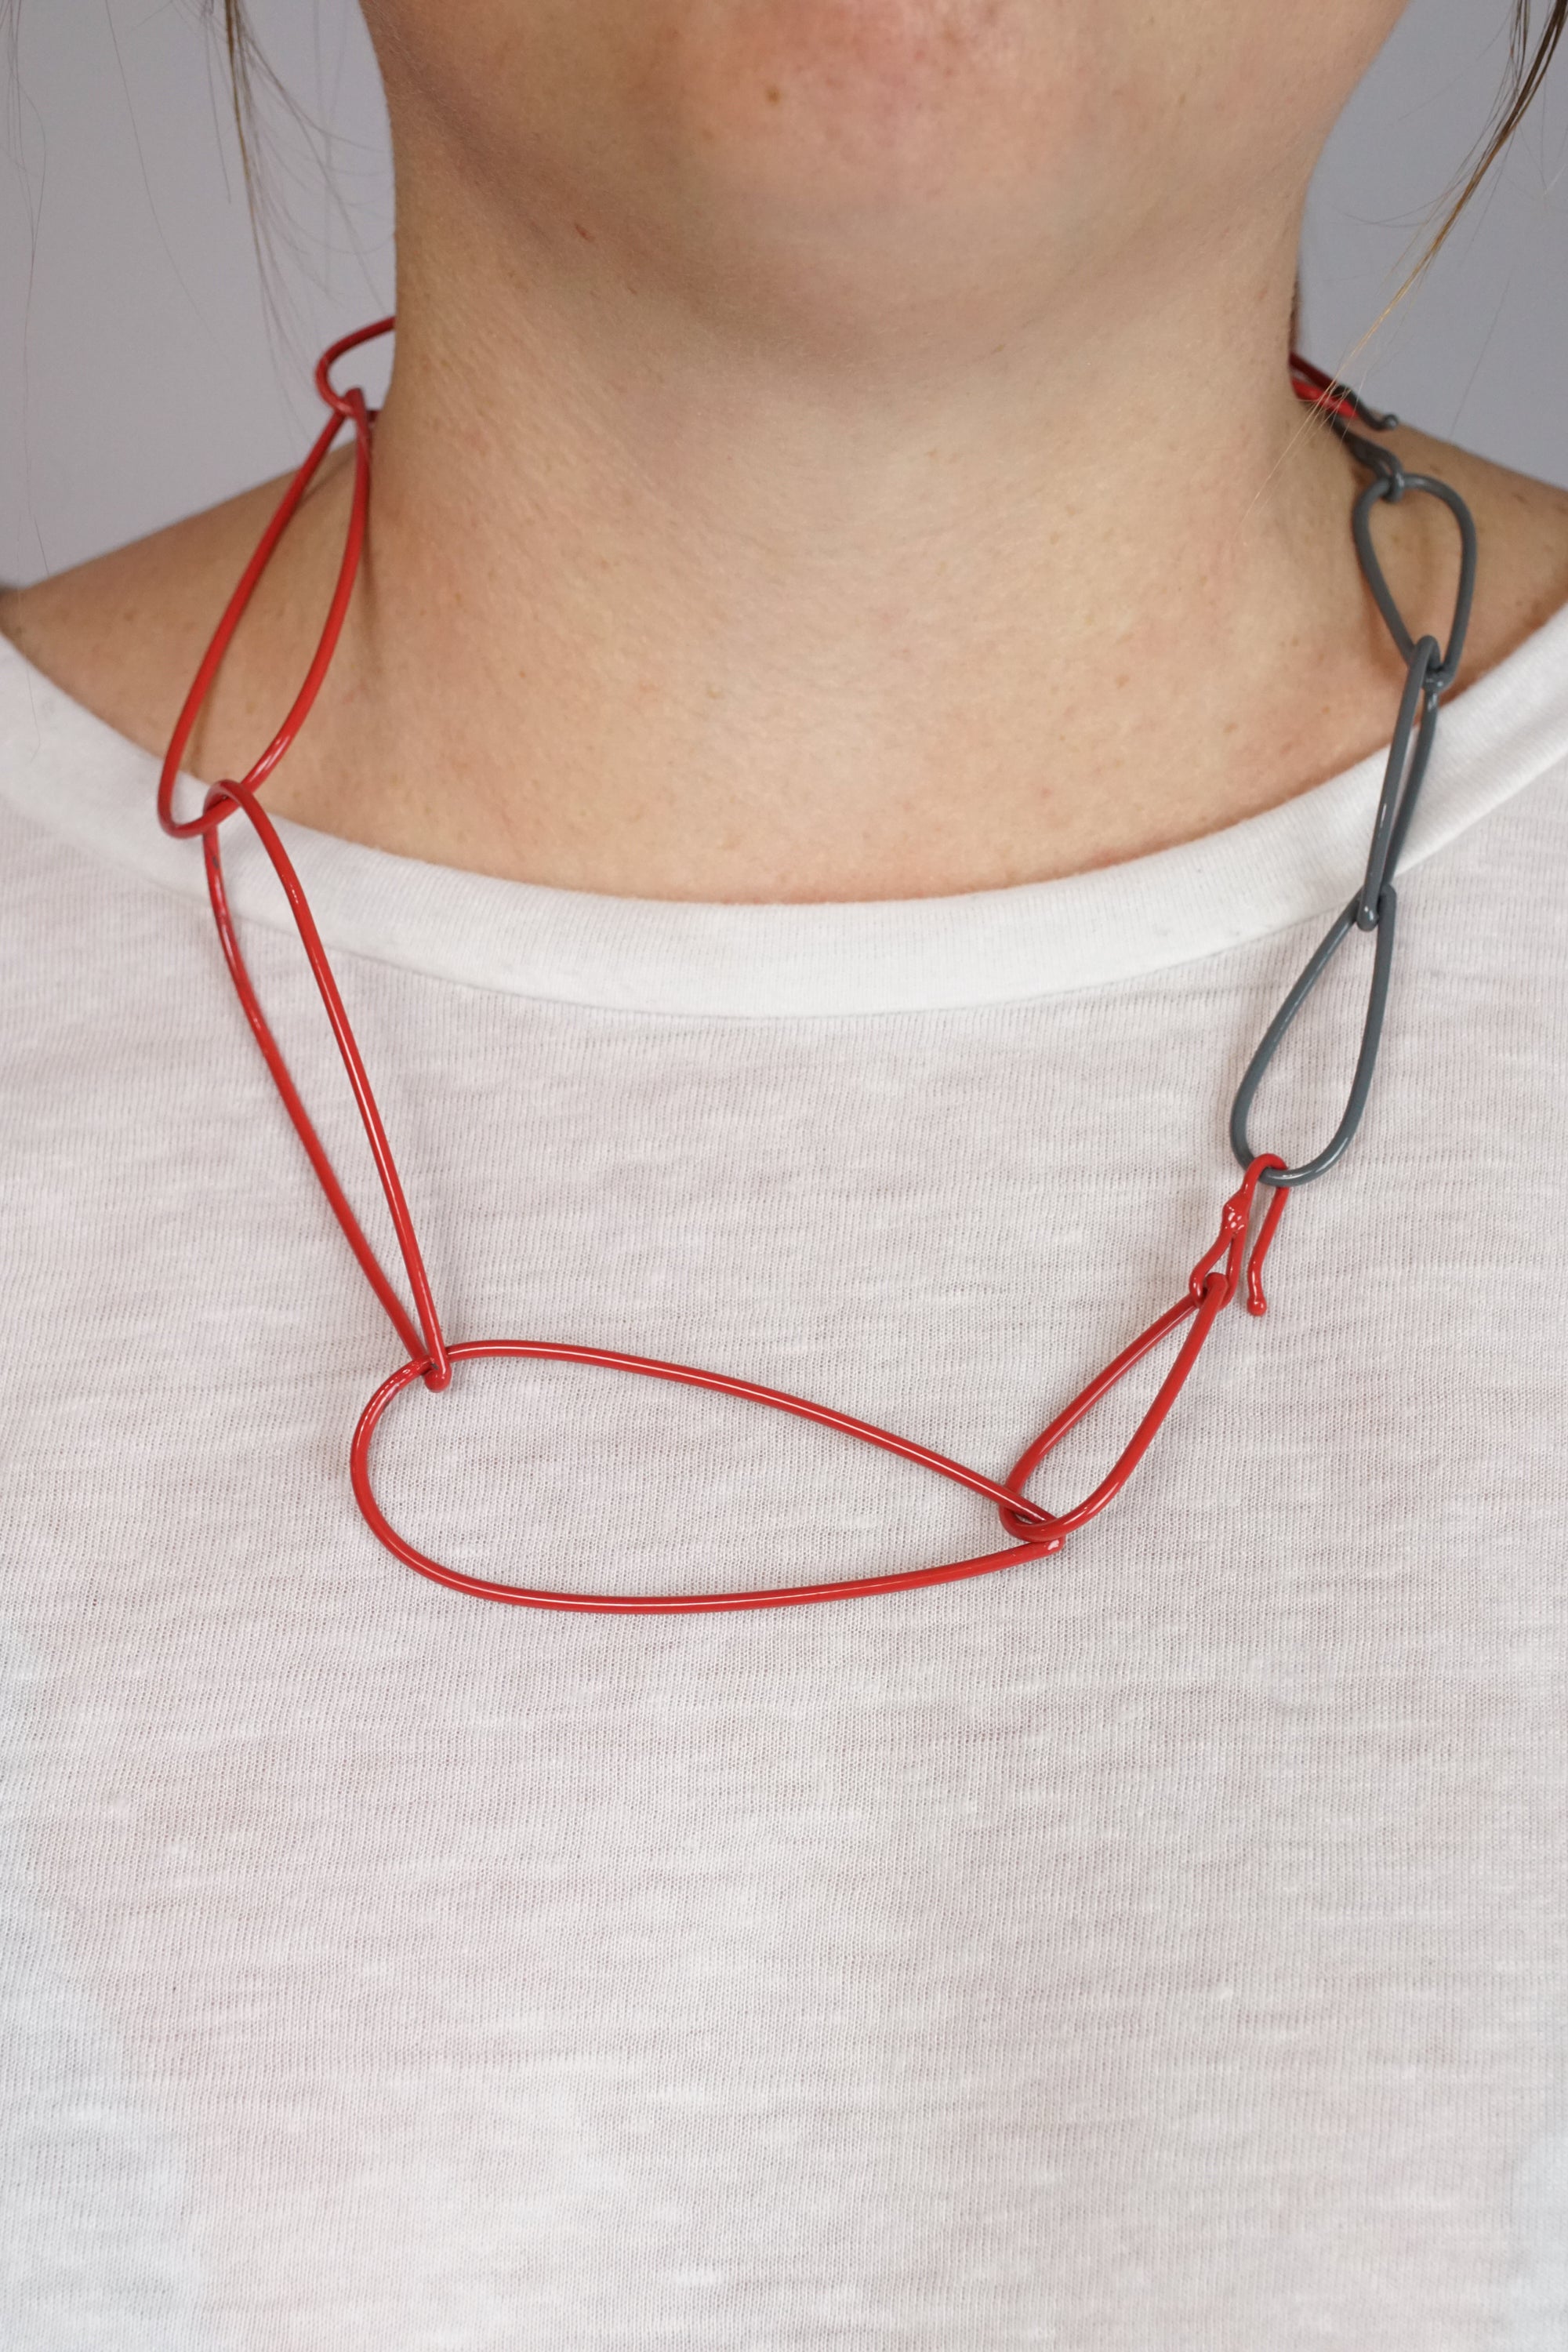 Modular Necklace in Coral Red and Storm Grey